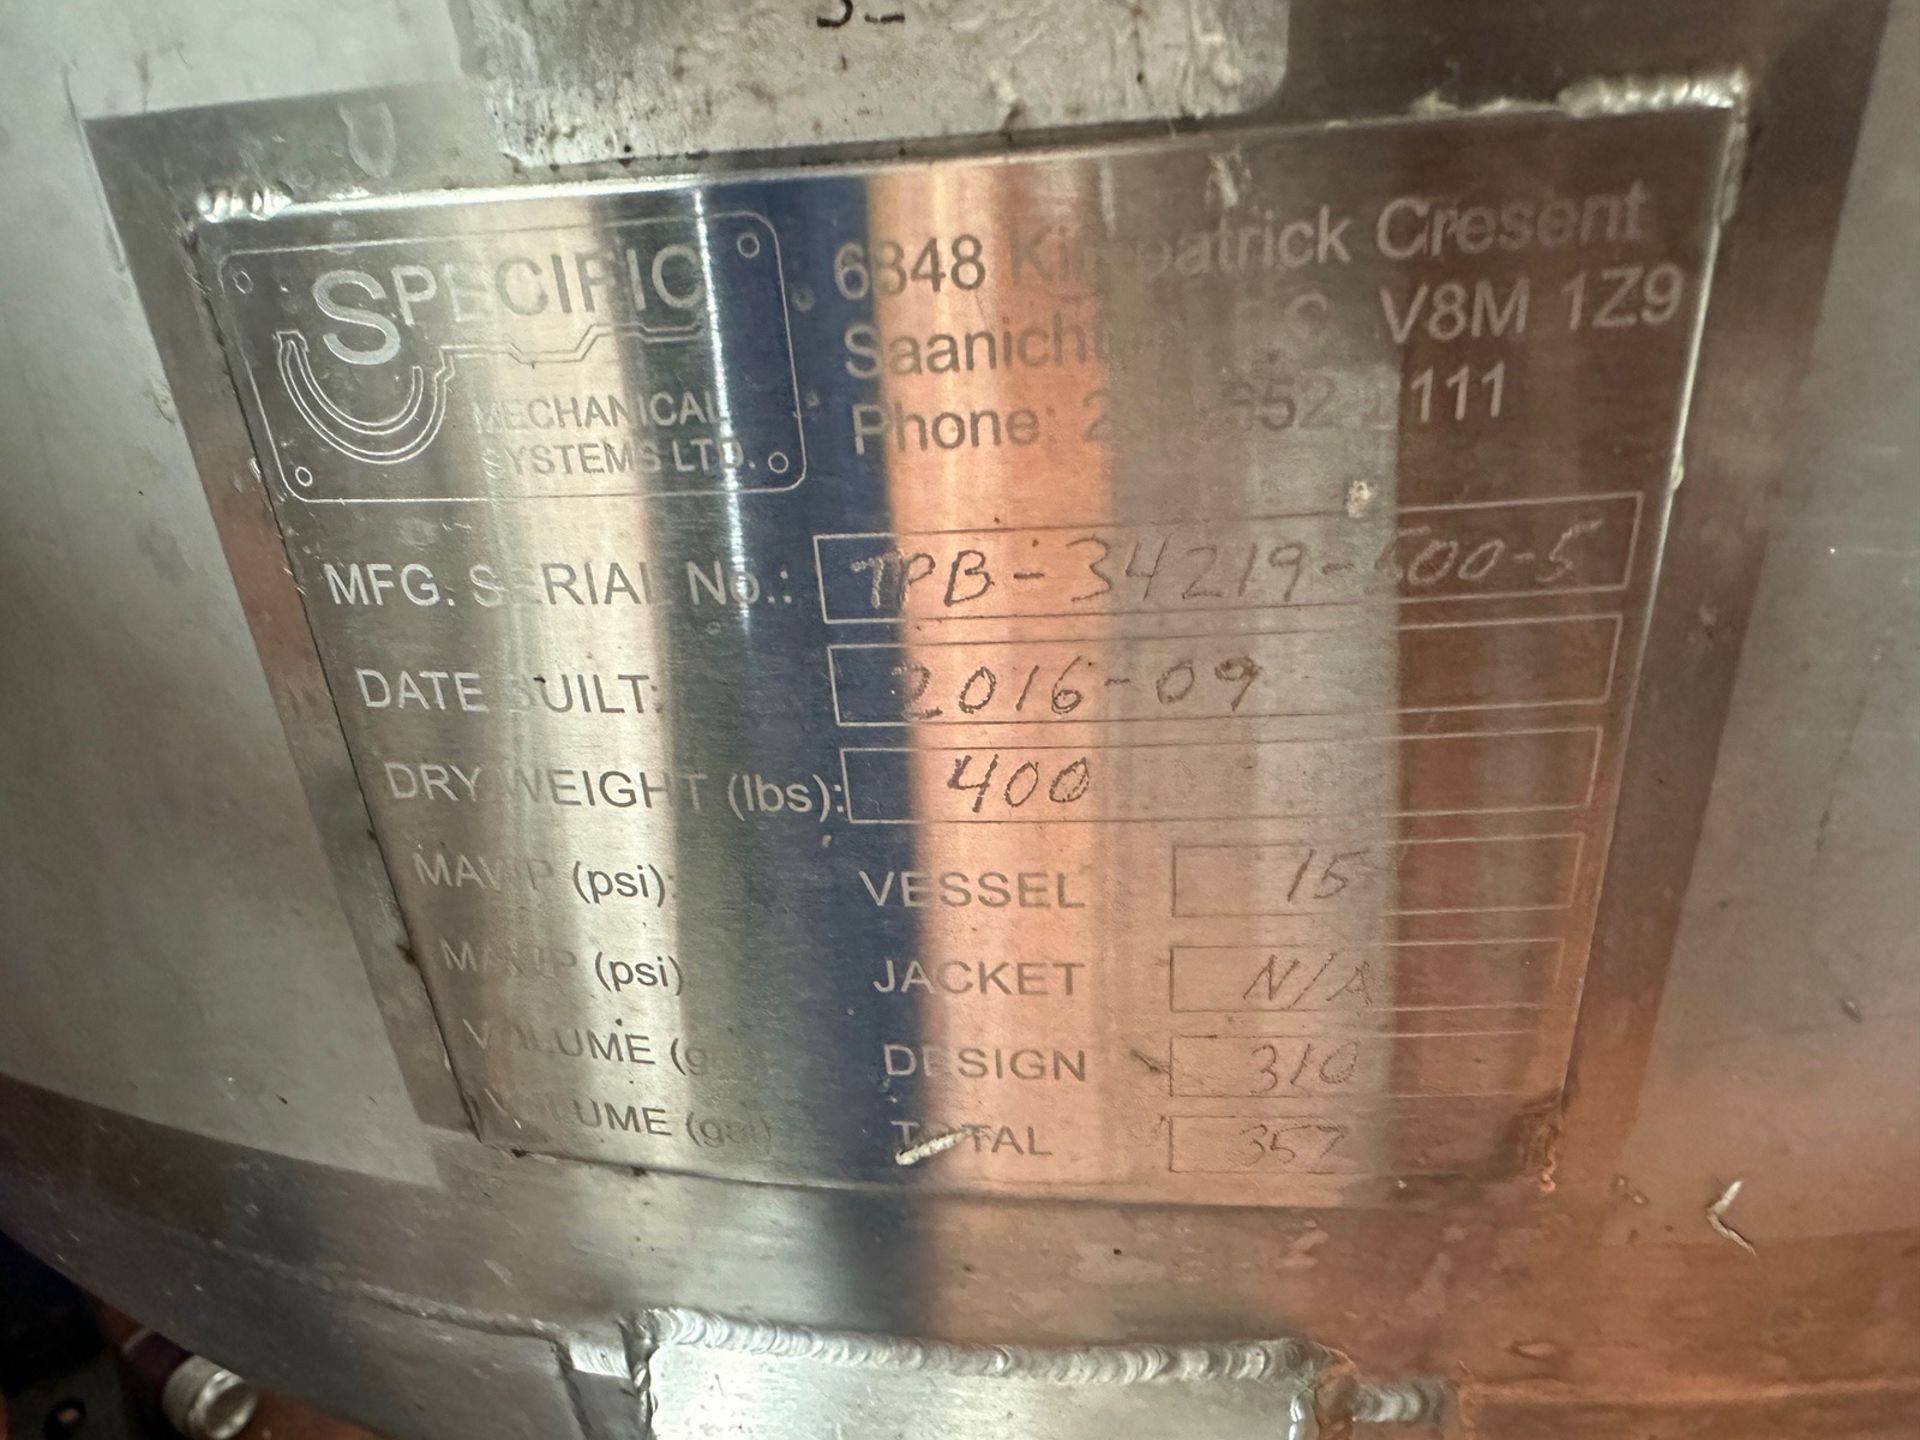 2016 - 10 BBL Specific Mechanical Stainless Steel Serving Tank - Dish Bottom, Singl | Rig Fee $650 - Image 2 of 2